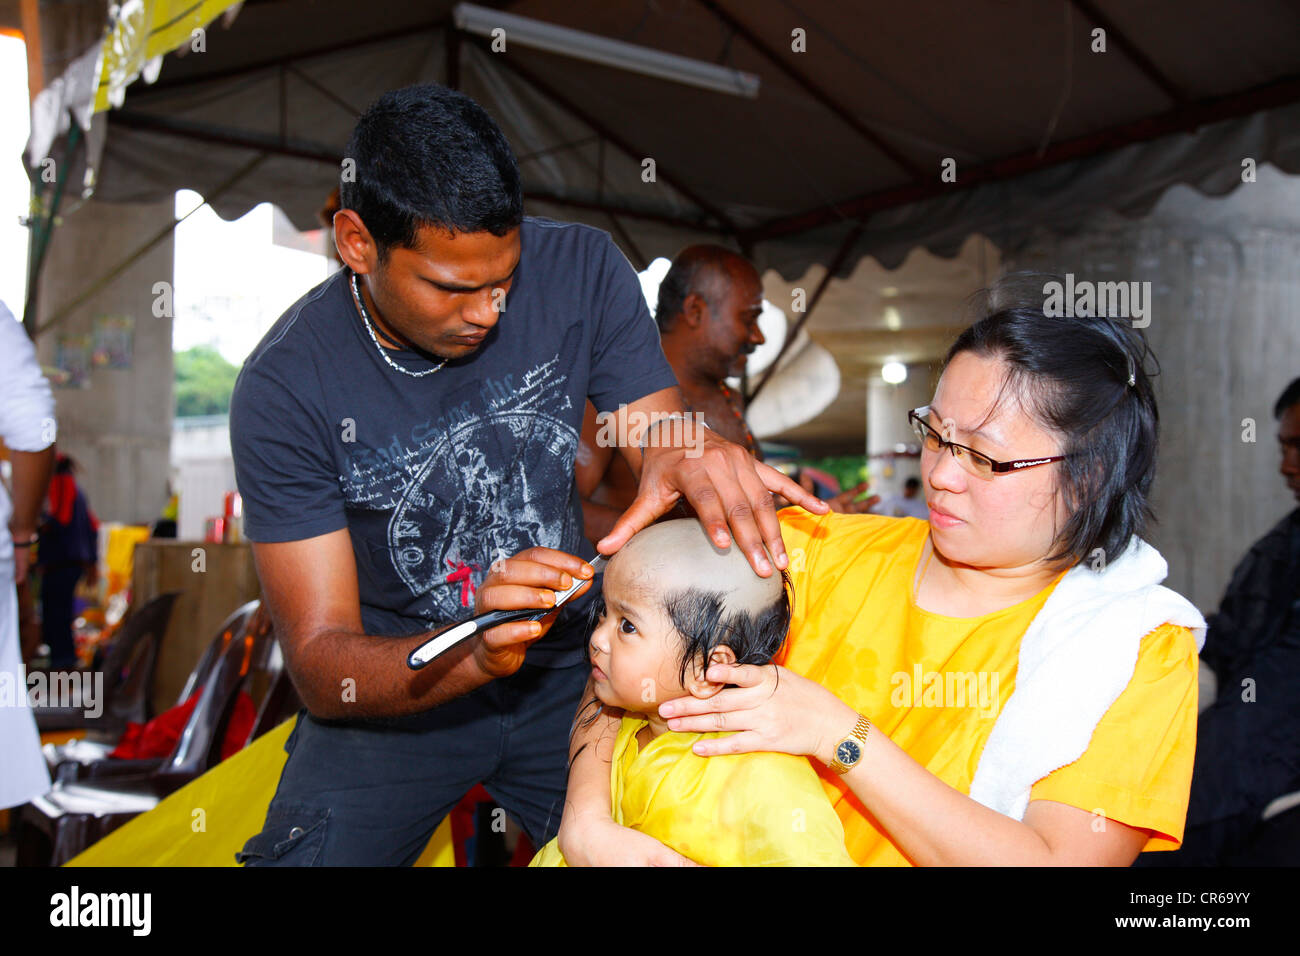 Child's hair being shaved with a razor, Hindu festival Thaipusam, Batu Caves limestone caves and temples, Kuala Lumpur, Malaysia Stock Photo